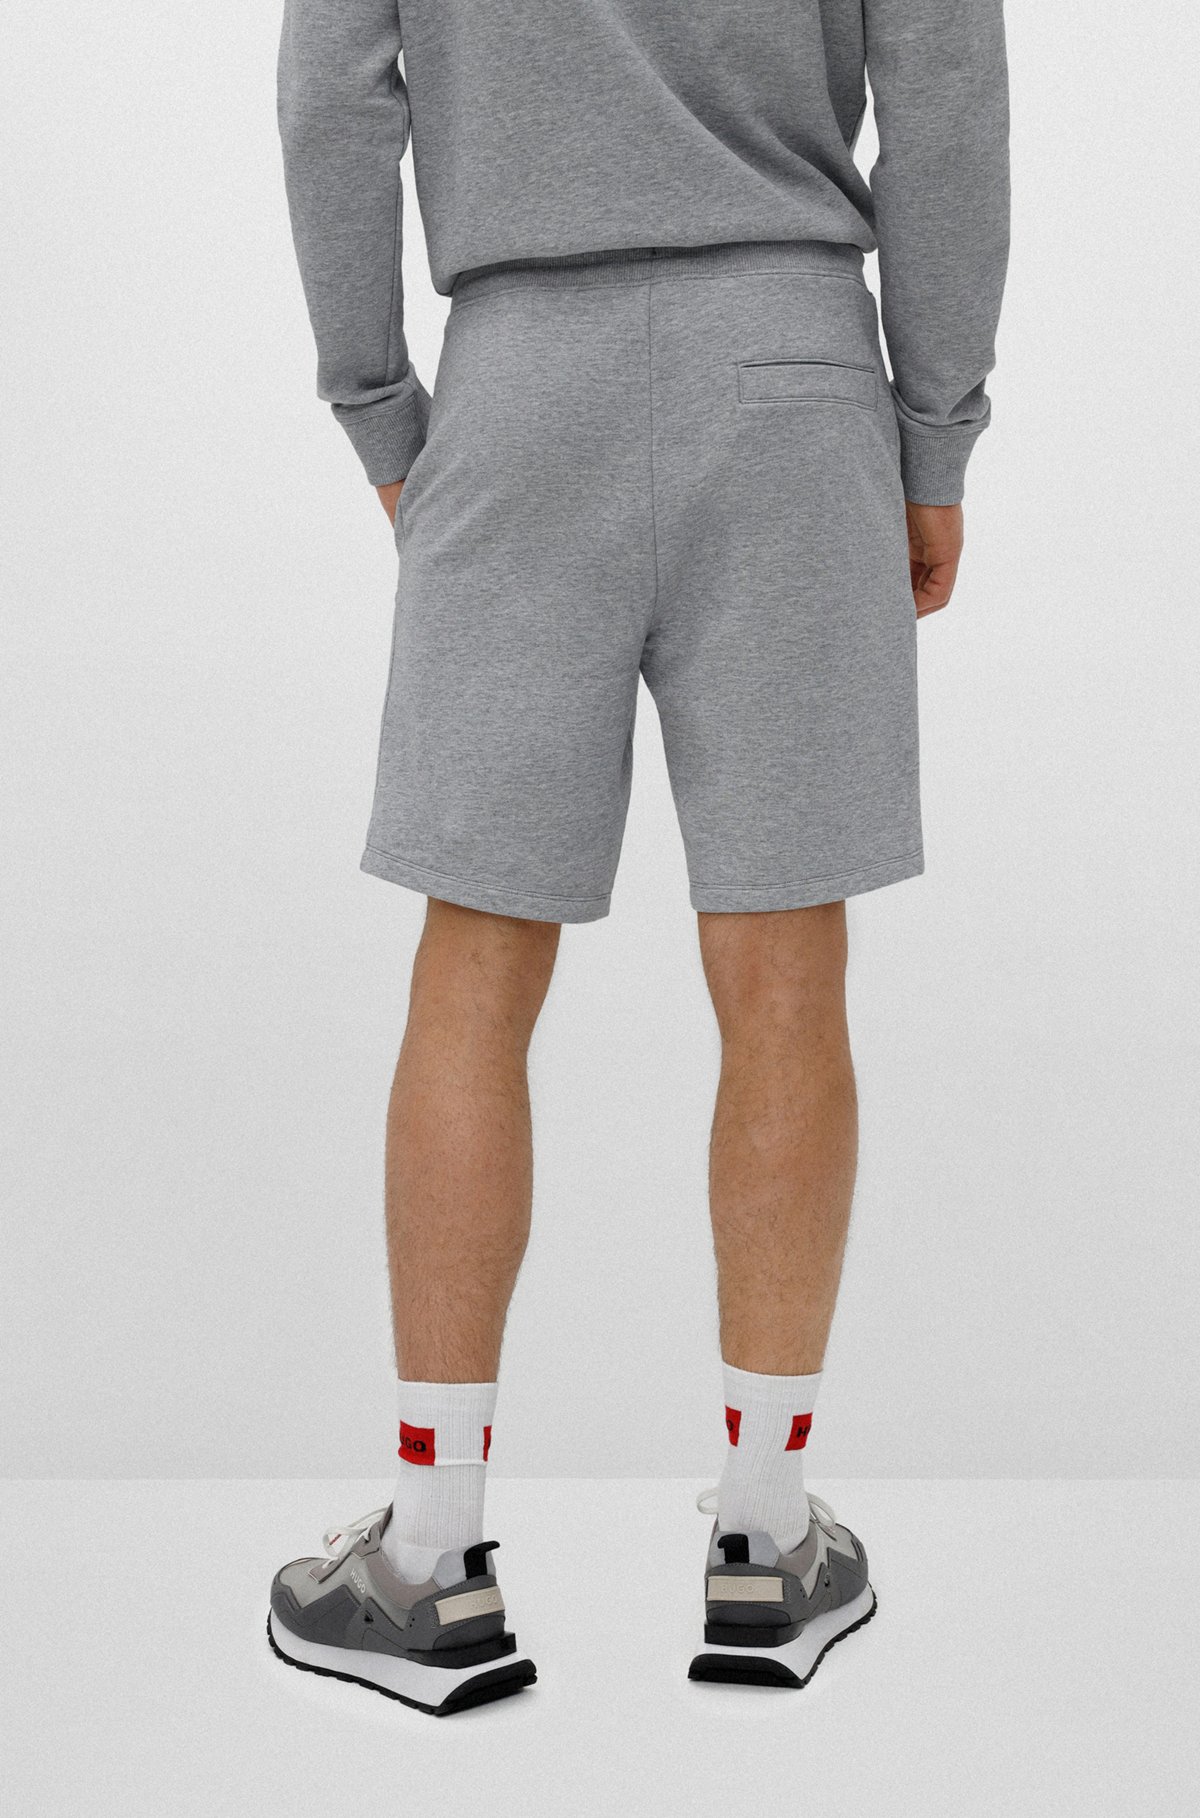 French-terry-cotton shorts with red logo label, Dark Grey